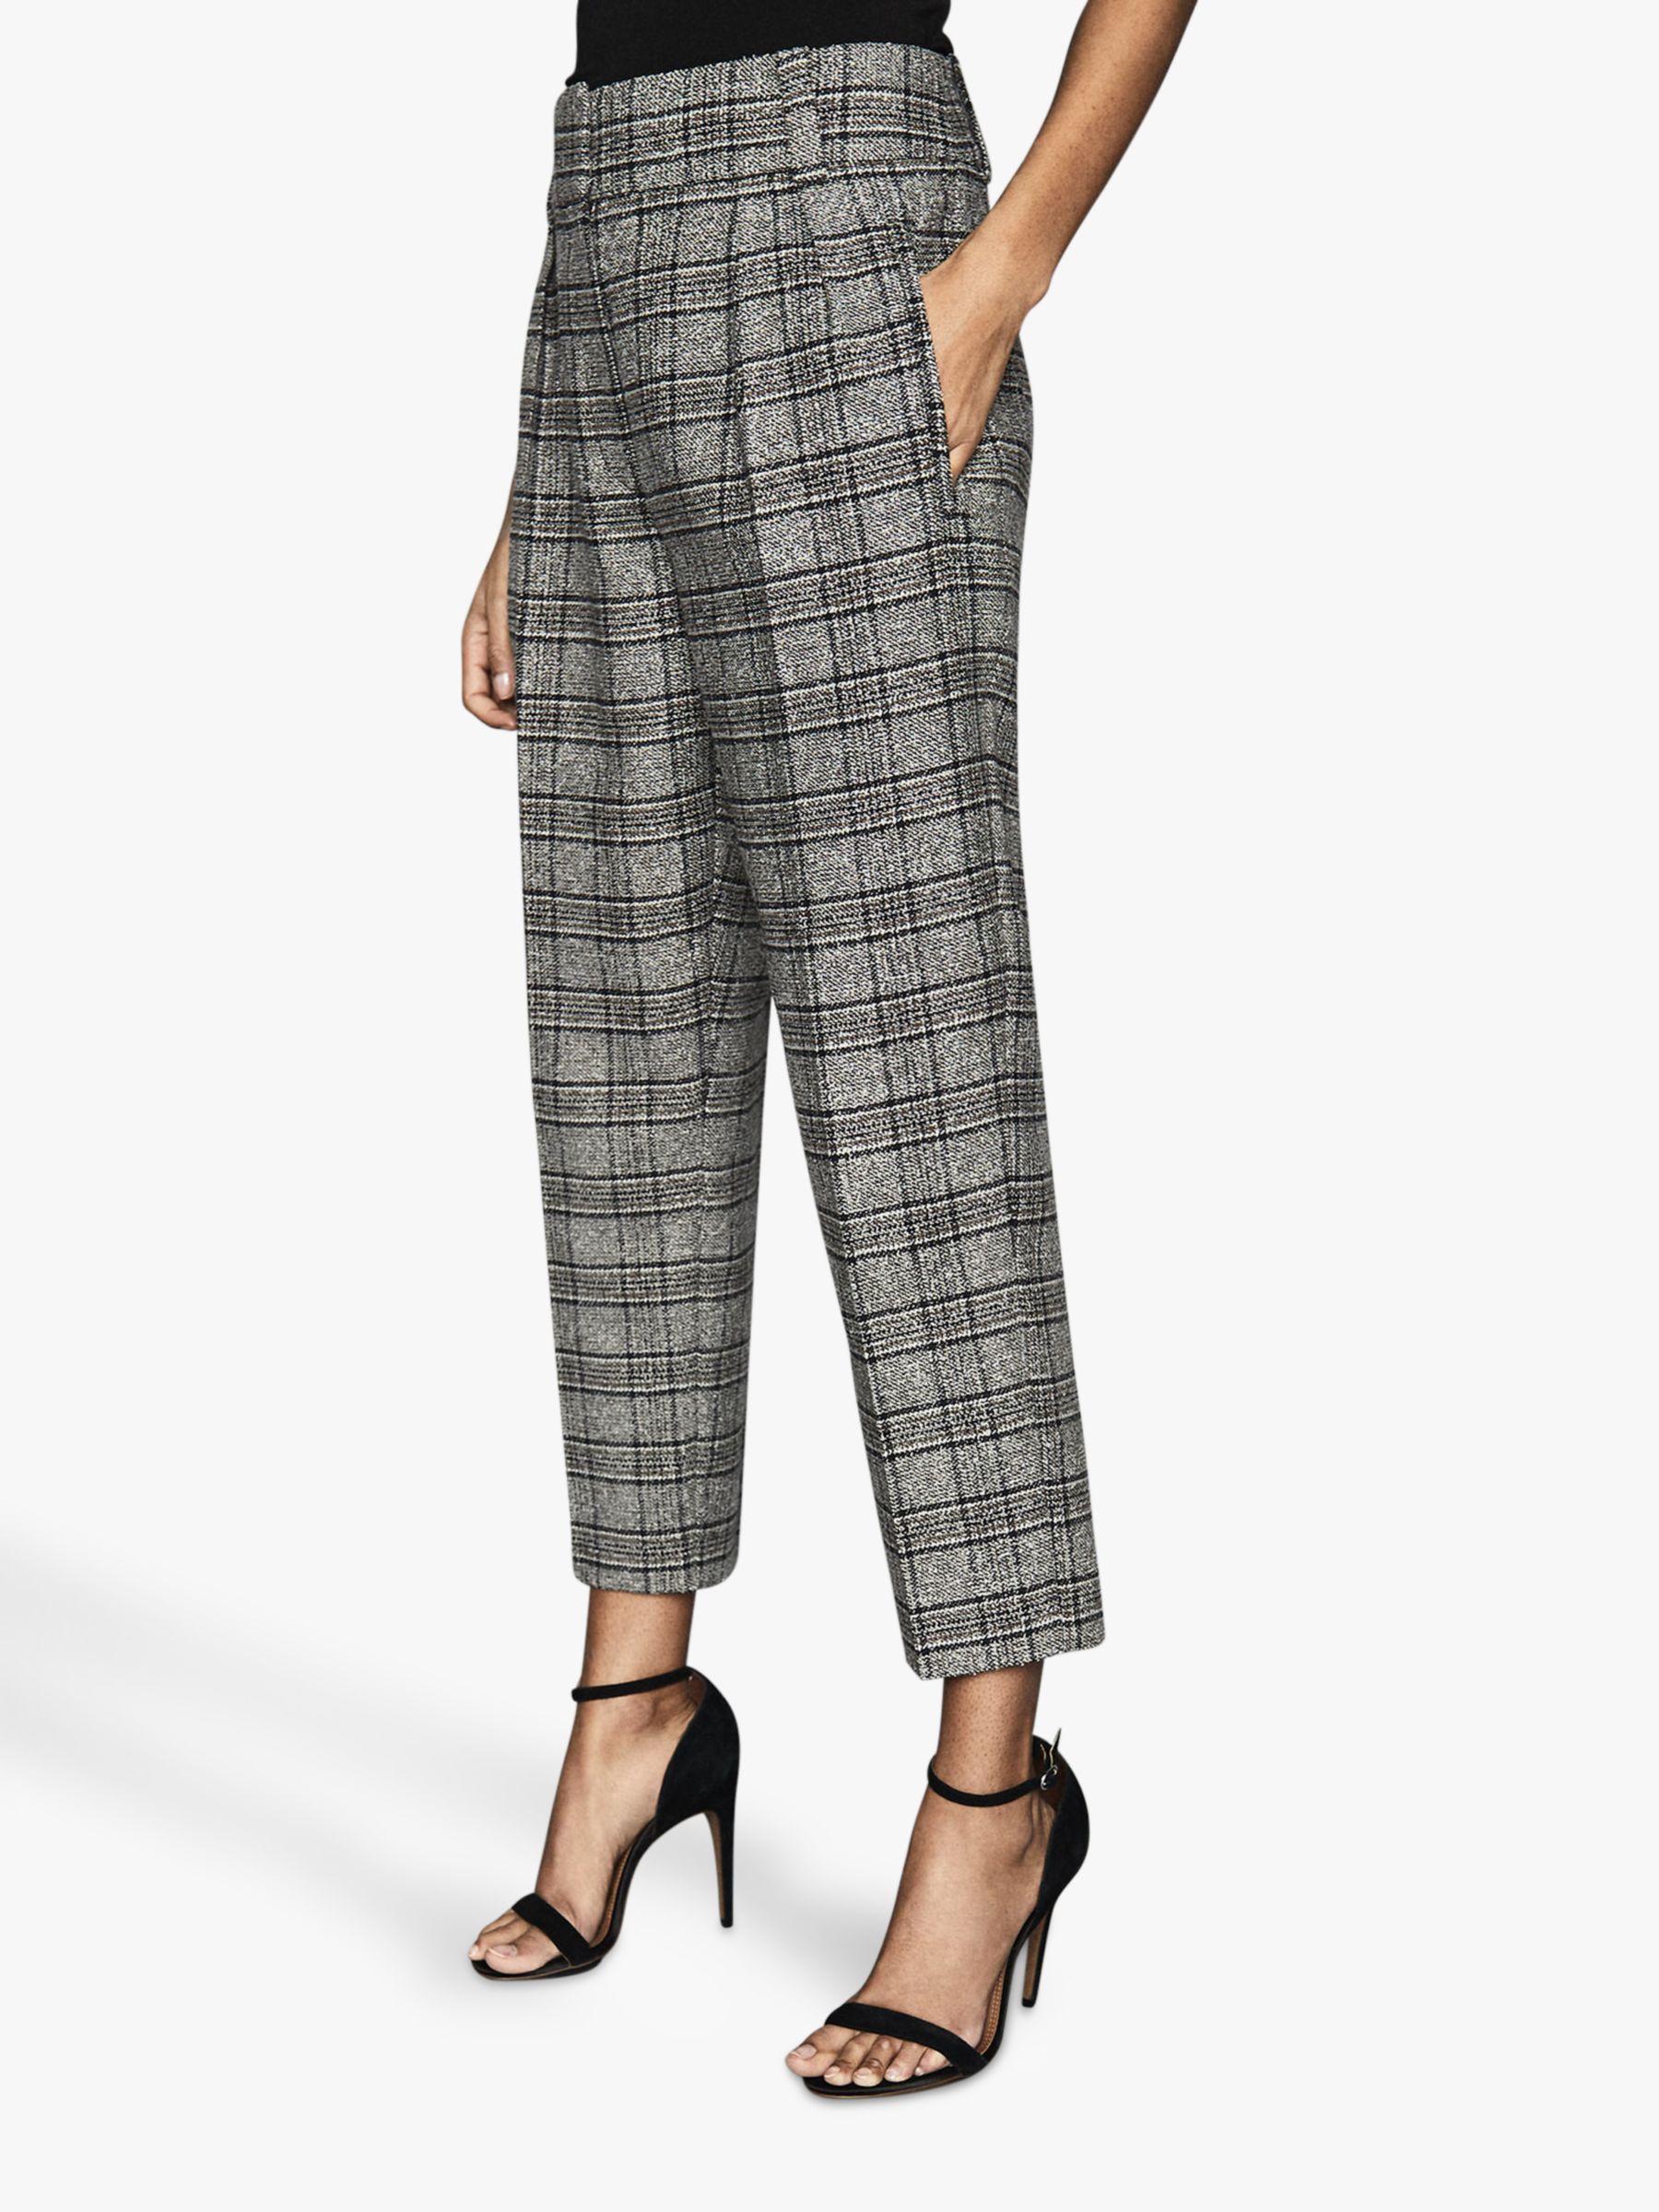 Reiss Arya Checked Pleated Front Trousers, Multi at John Lewis & Partners